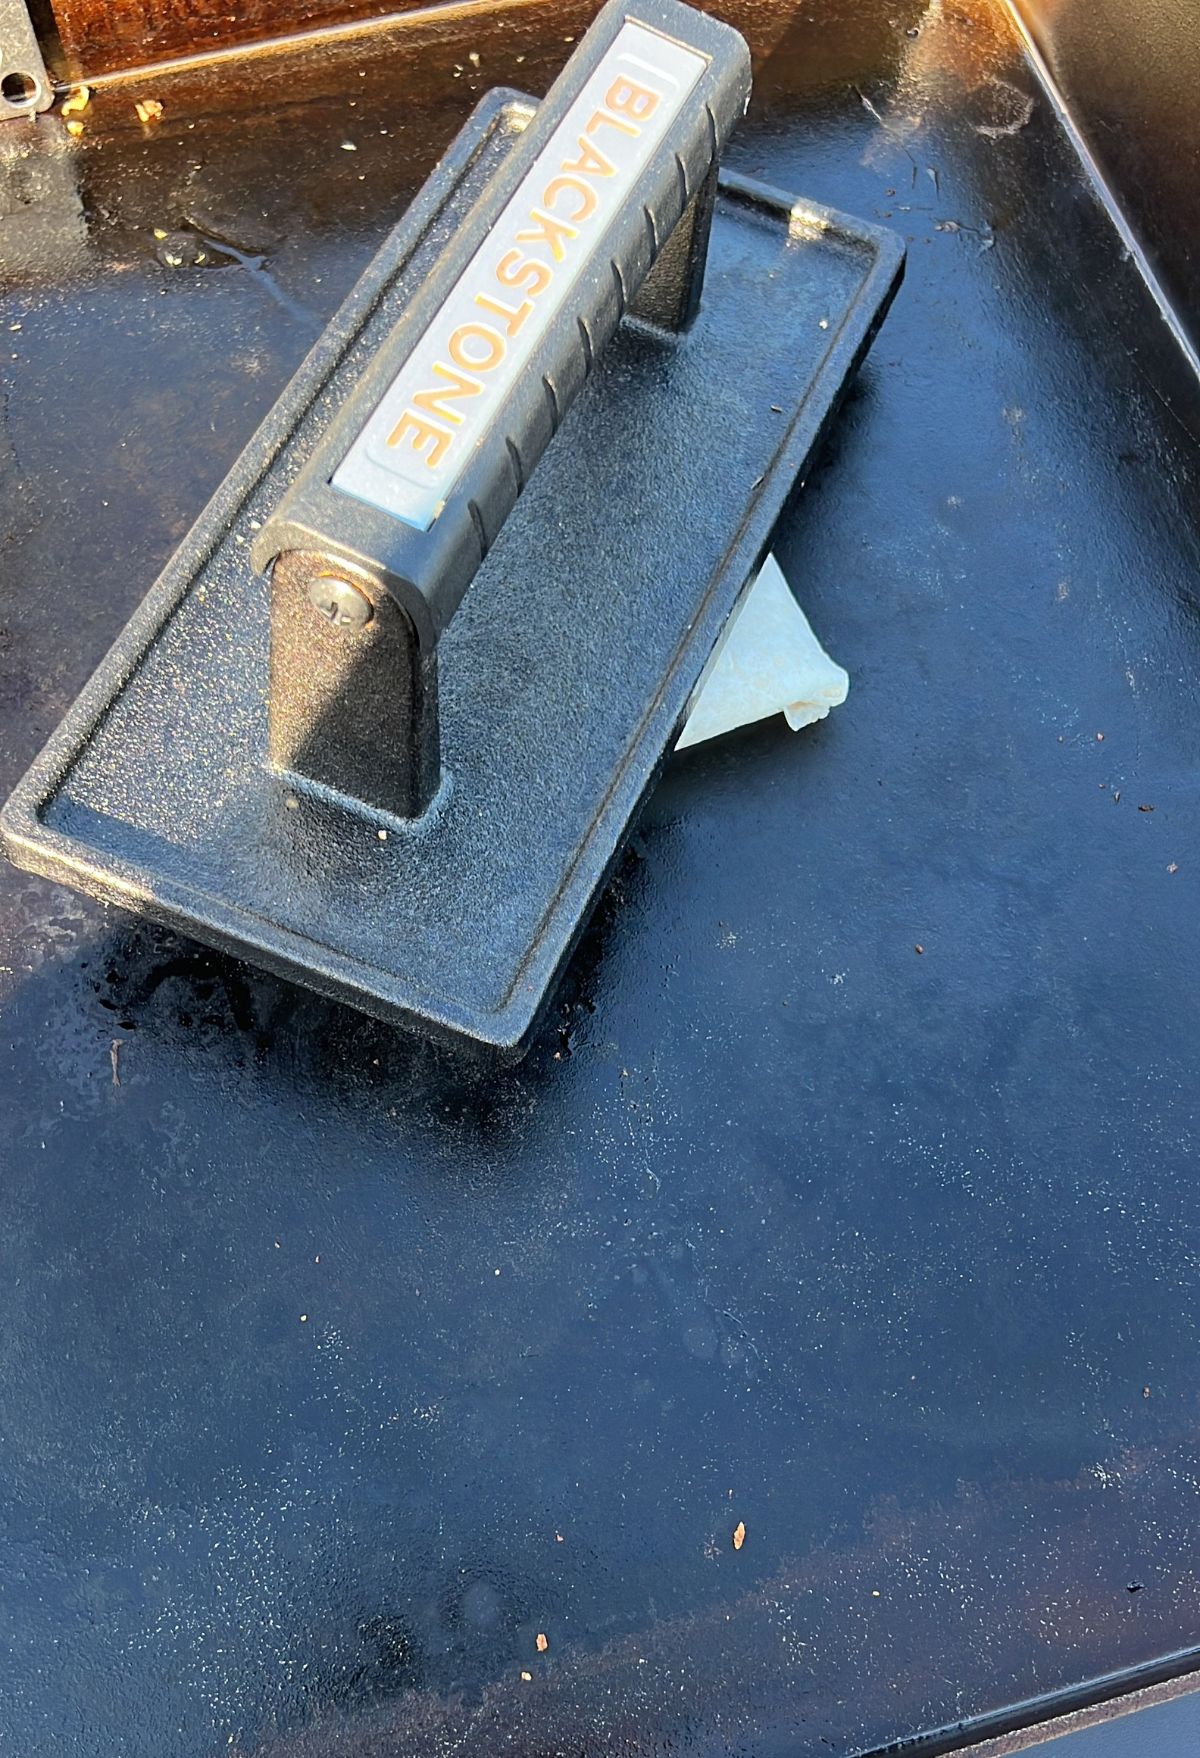 A discarded cigarette butt on a metal ashtray with the word "no smoking" visible.